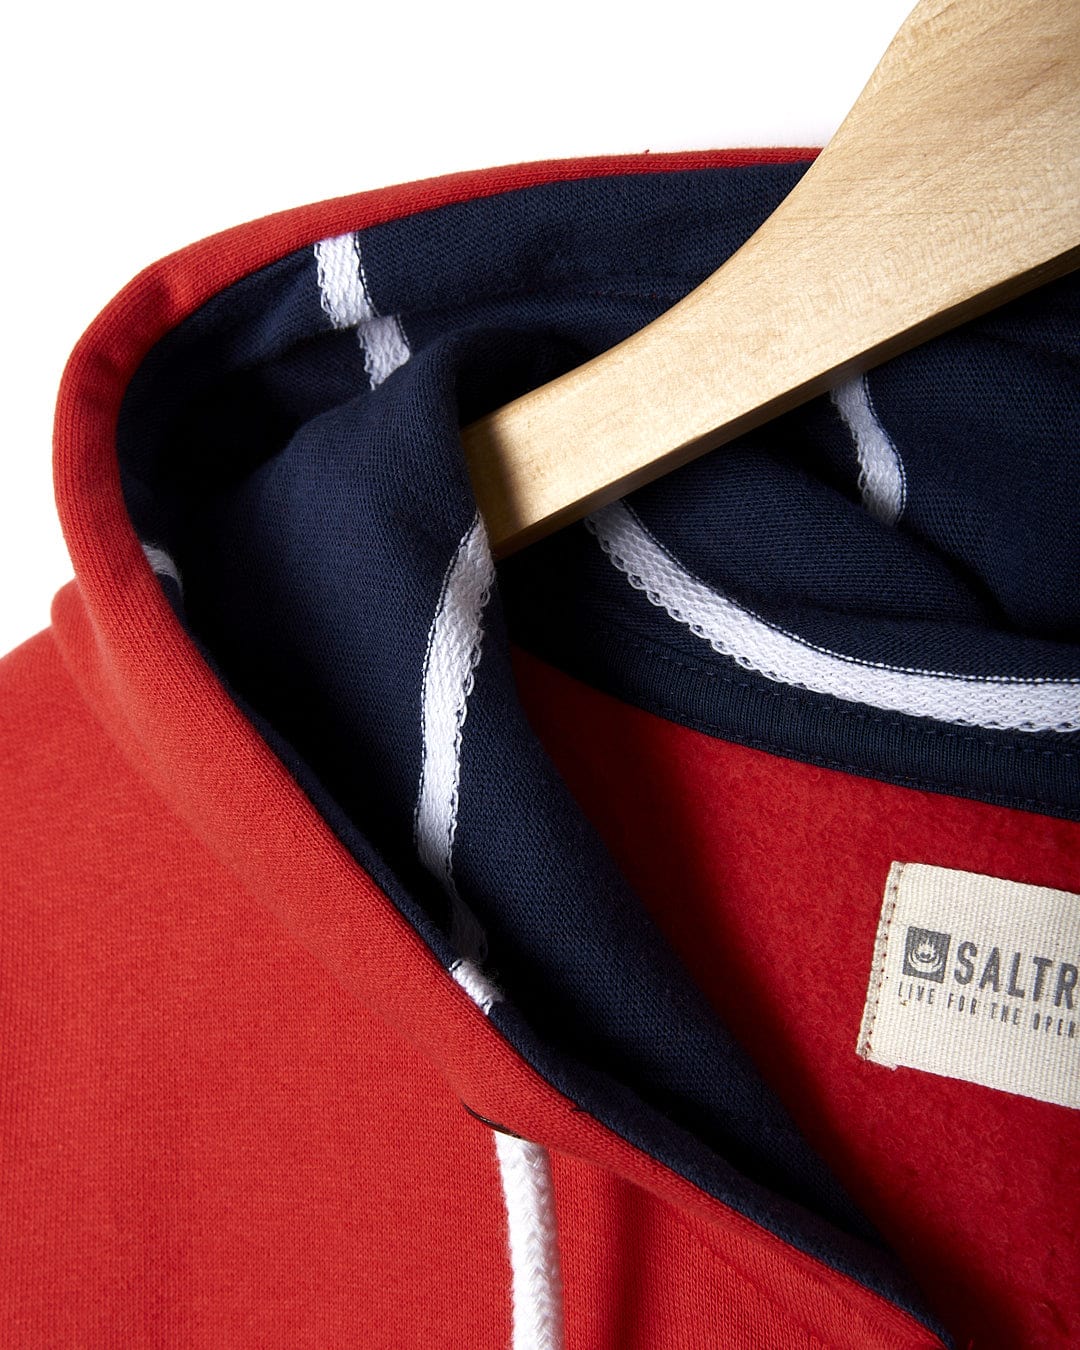 A Saltrock On The Road Wales - Women's Zip Hoodie - Red and navy hoodie hanging on a wooden hanger.